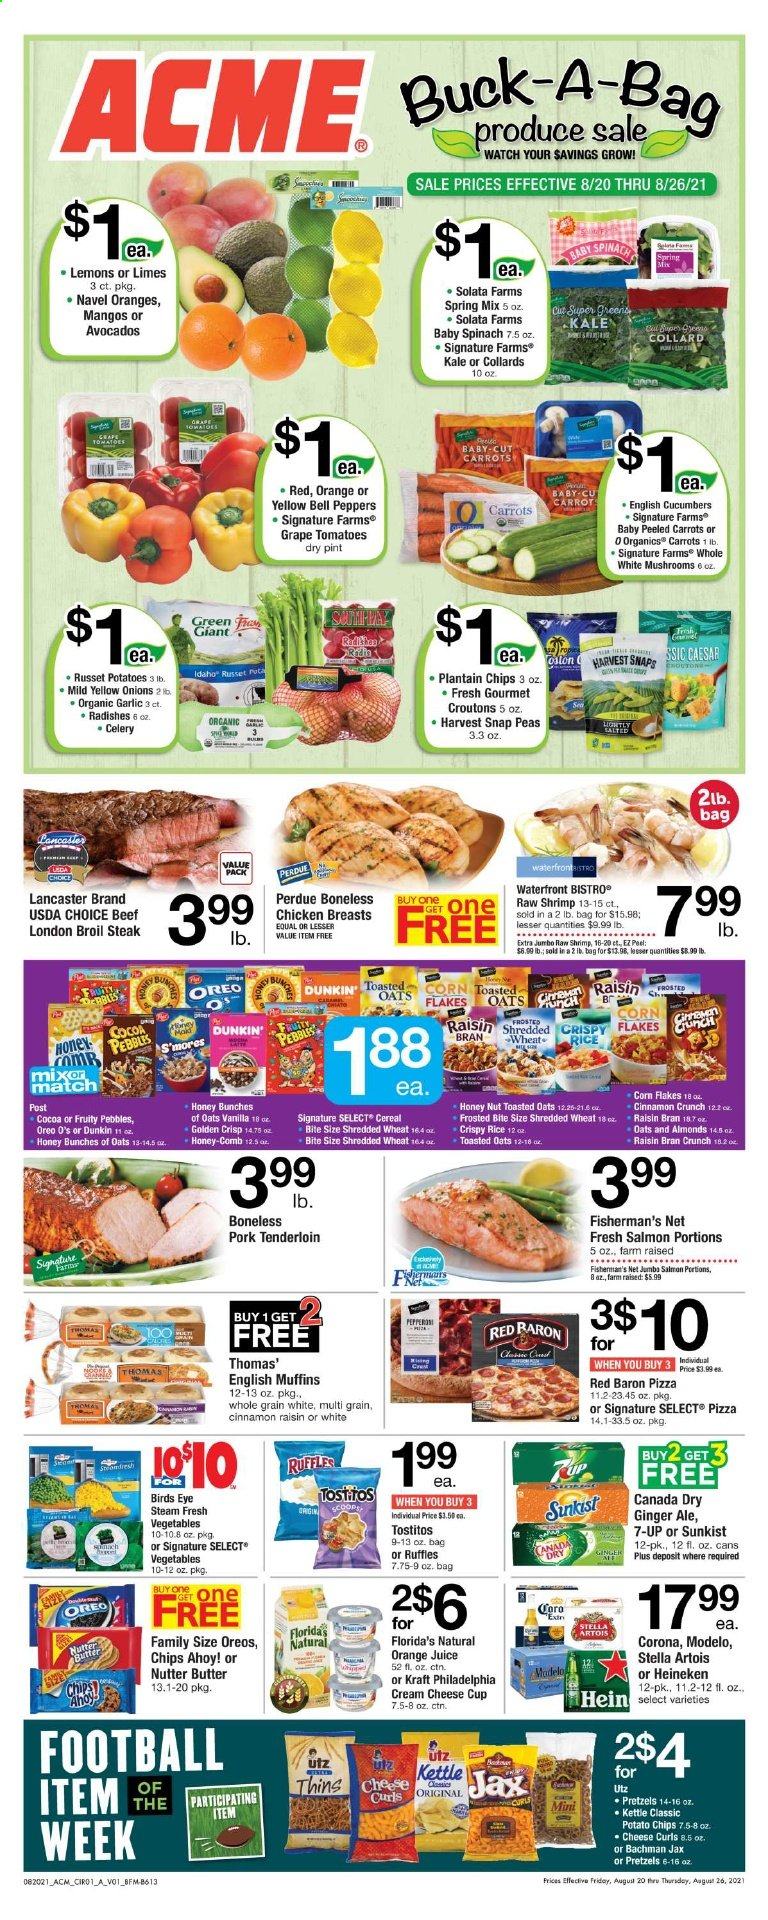 thumbnail - ACME Flyer - 08/20/2021 - 08/26/2021 - Sales products - english muffins, pretzels, bell peppers, carrots, celery, cucumber, garlic, radishes, russet potatoes, kale, peas, onion, peppers, avocado, limes, salmon, shrimps, pizza, Bird's Eye, Perdue®, Kraft®, cream cheese, Philadelphia, cheese cup, Oreo, butter, snap peas, Red Baron, Chips Ahoy!, Florida's Natural, potato chips, chips, Thins, Ruffles, Tostitos, croutons, Harvest Snaps, cereals, corn flakes, Fruity Pebbles, Raisin Bran, toasted oats, Canada Dry, ginger ale, orange juice, juice, 7UP, beer, Corona Extra, Heineken, Modelo, chicken breasts, steak, pork meat, pork tenderloin, comb, cup, watch, lemons, navel oranges. Page 3.